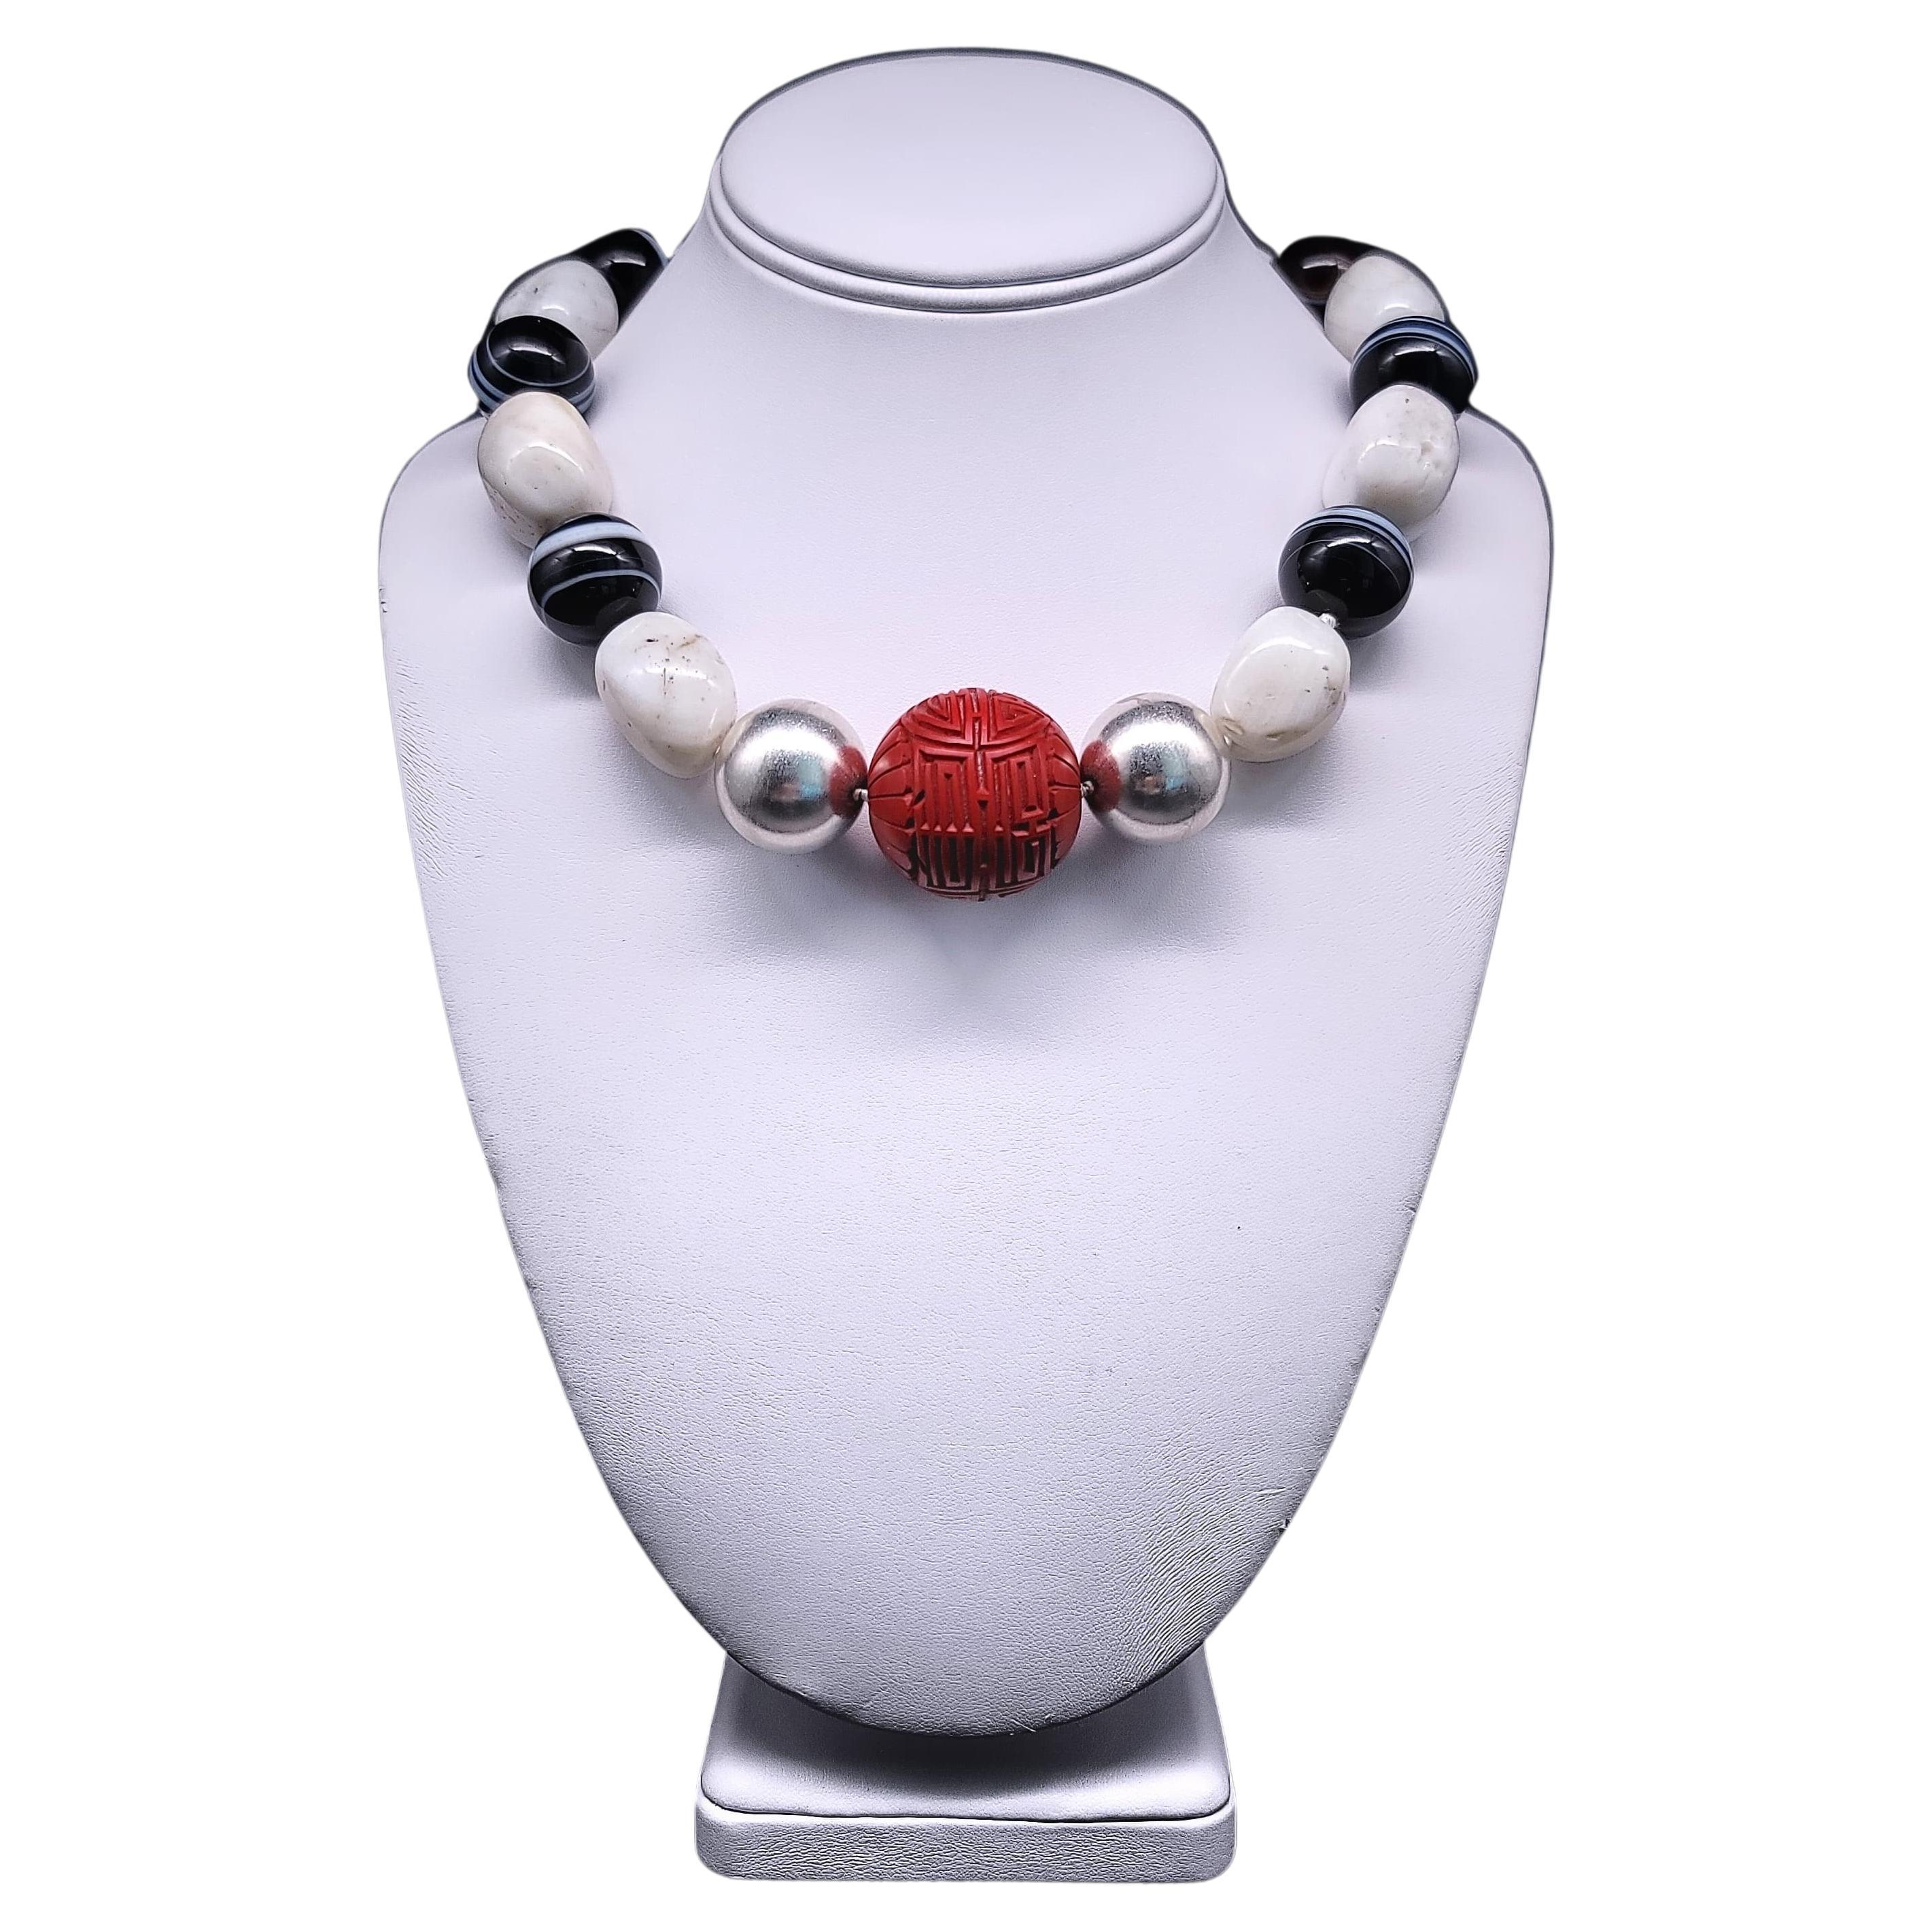 A.Jeschel Dramatic and Bold Agate and Sardonyx bead necklace. For Sale